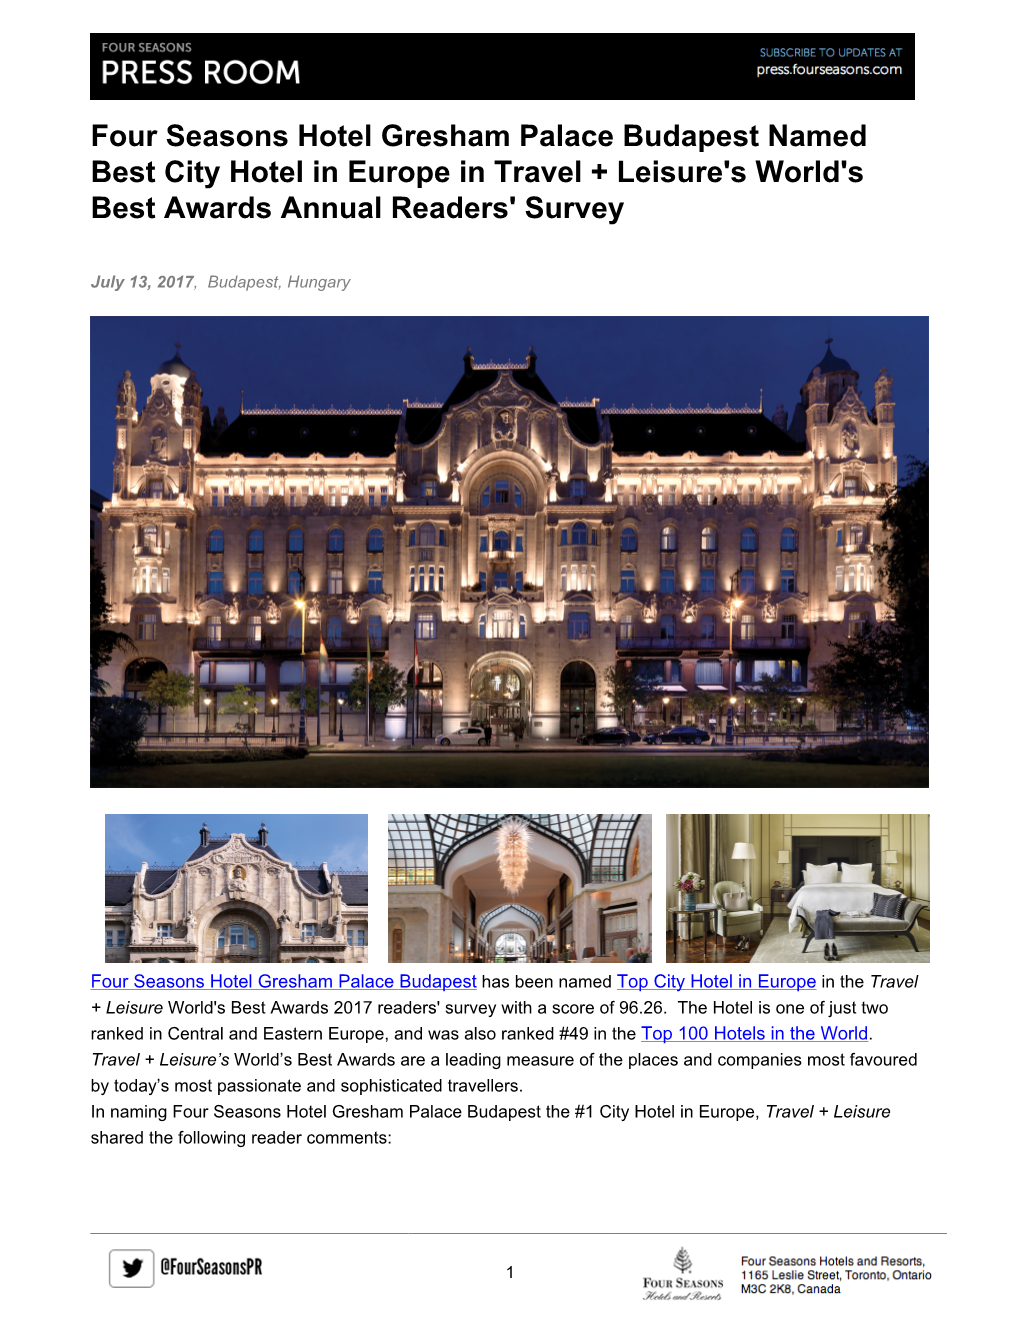 Four Seasons Hotel Gresham Palace Budapest Named Best City Hotel in Europe in Travel + Leisure's World's Best Awards Annual Readers' Survey